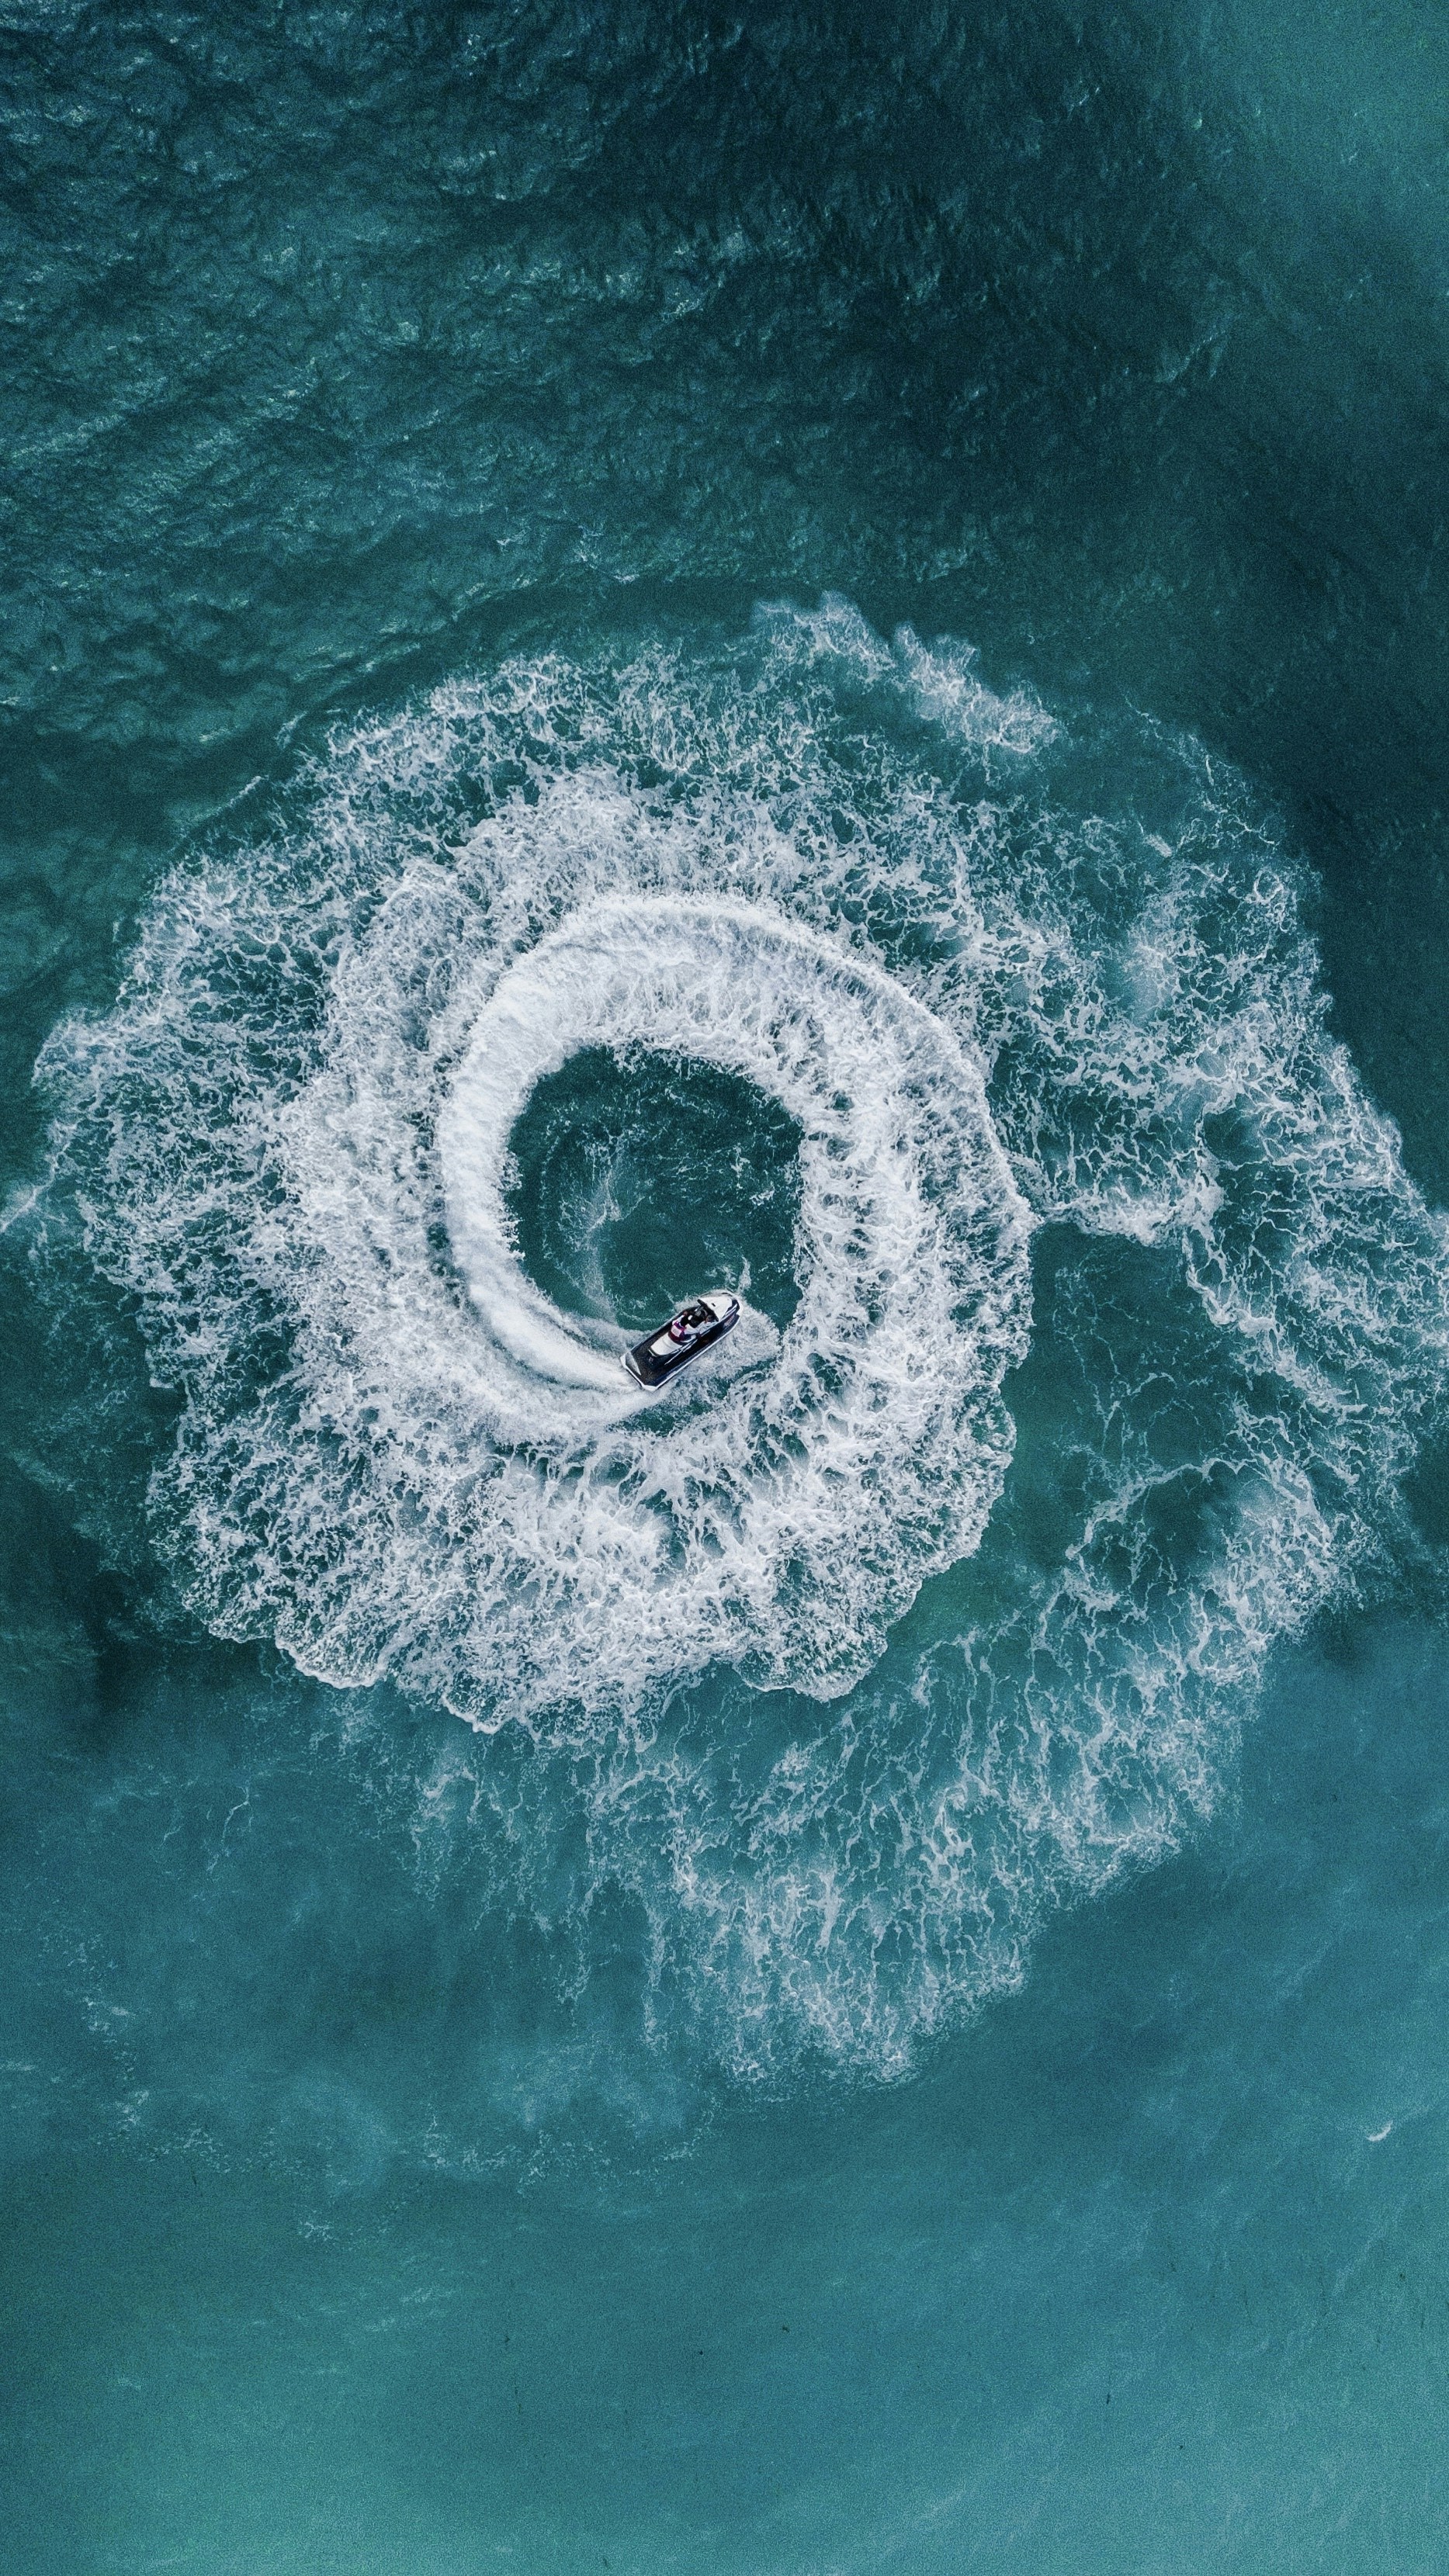 great photo recipe,how to photograph sea rider 💙; person driving personal watercraft during daytime